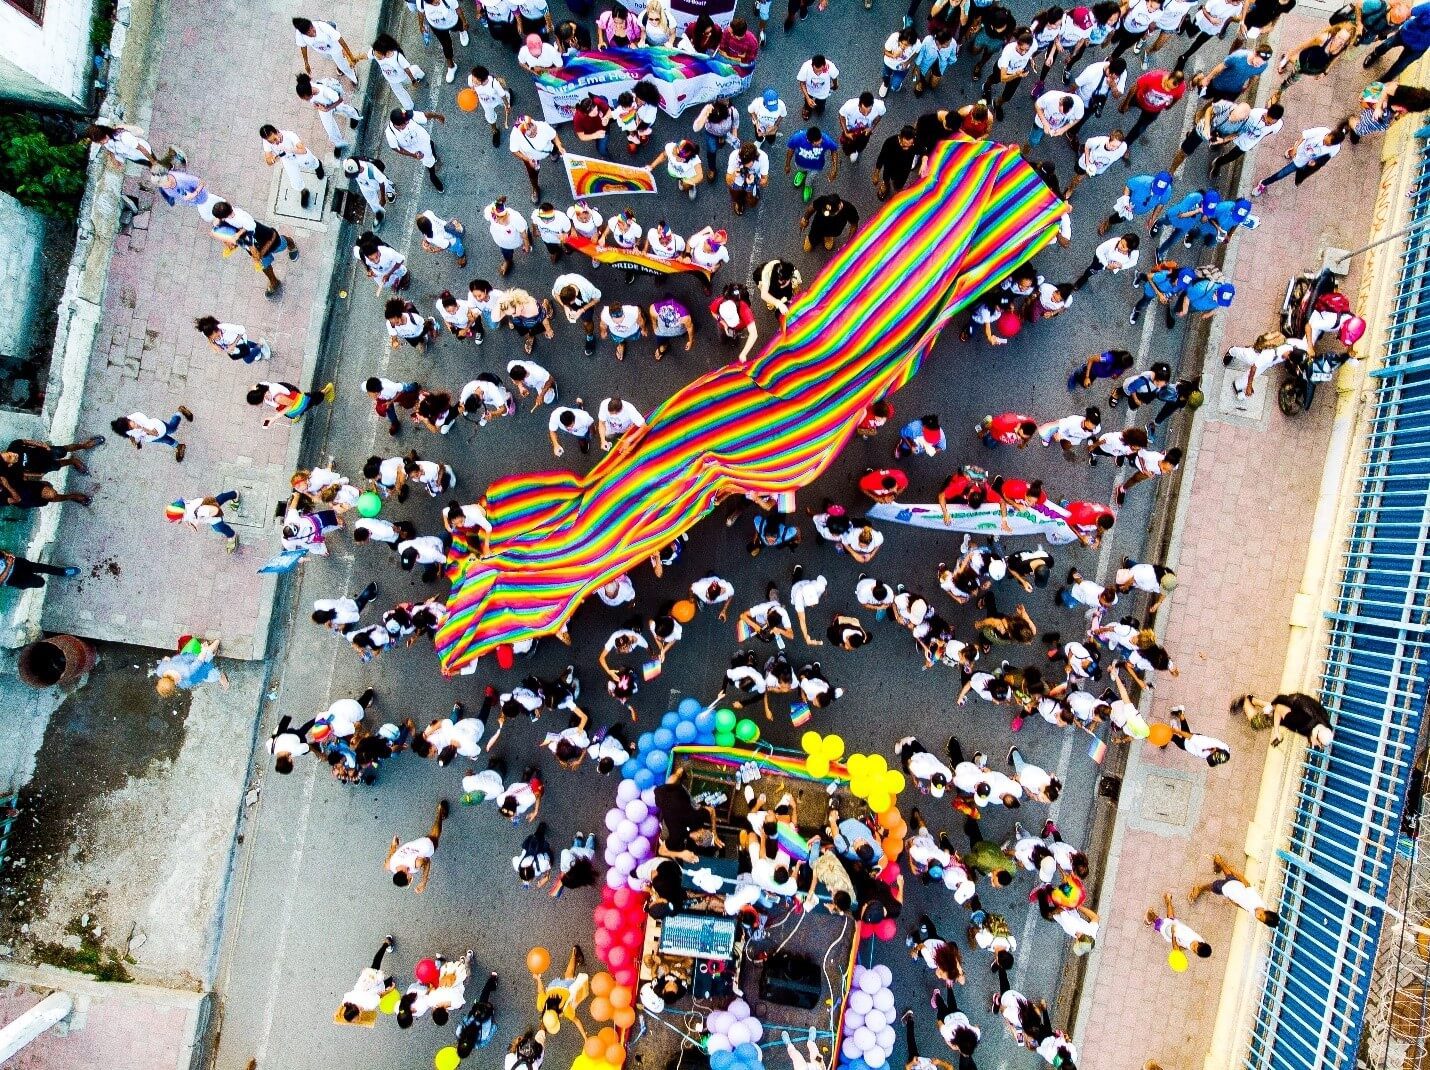 A view from above of a large crowd holding a Pride flag in the street